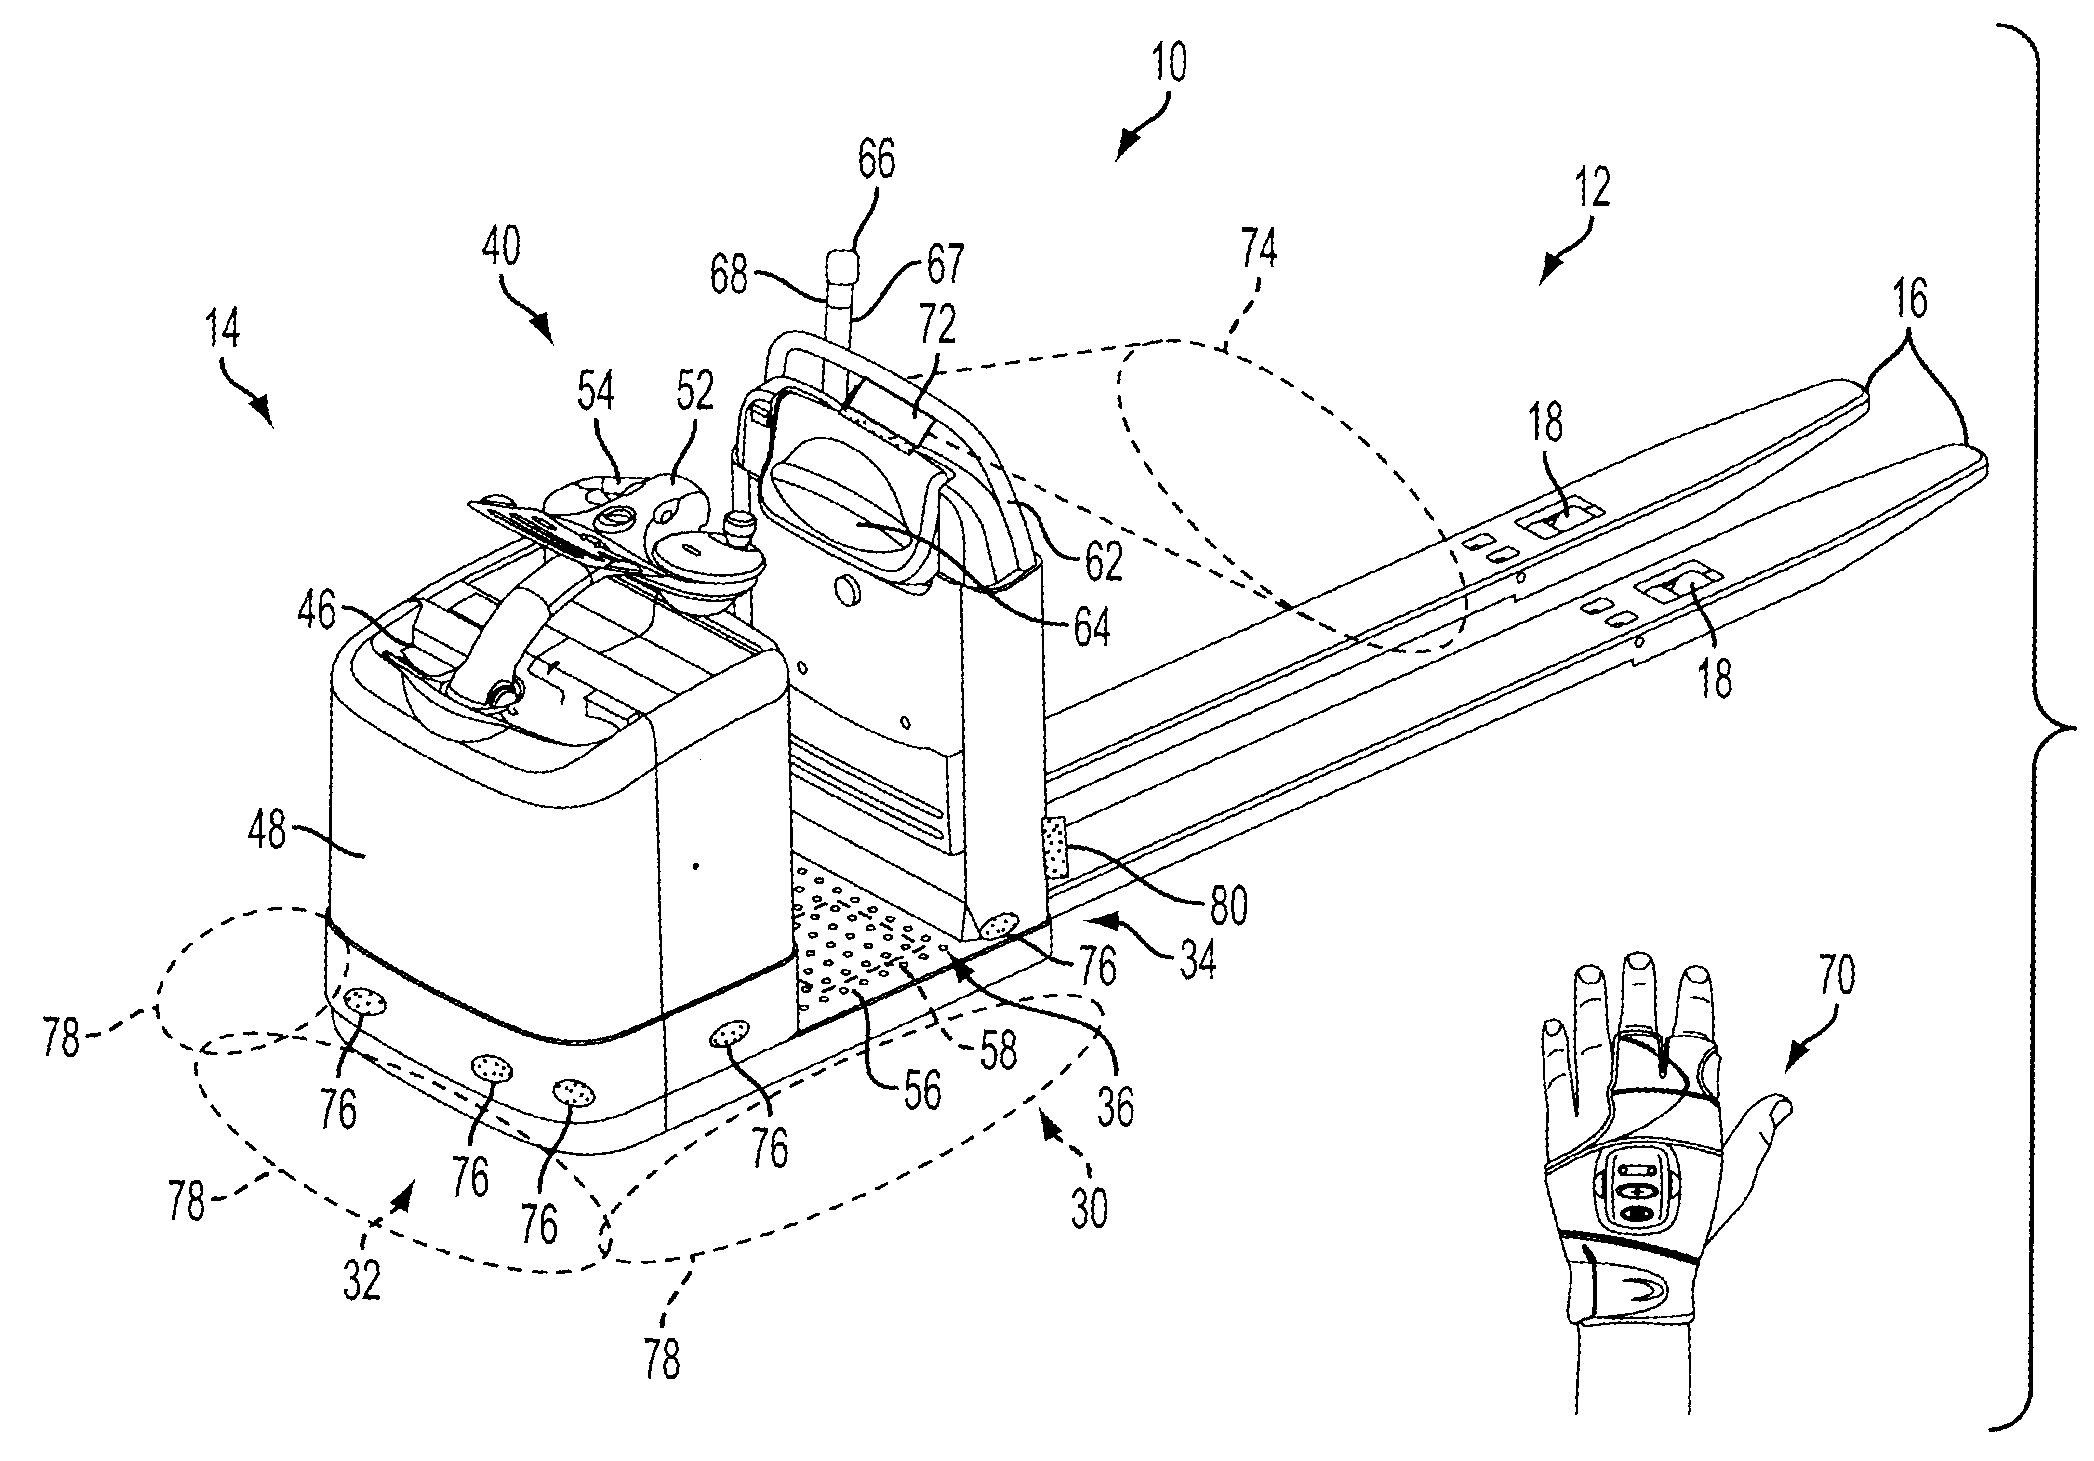 Systems and methods of remotely controlling a materials handling vehicle